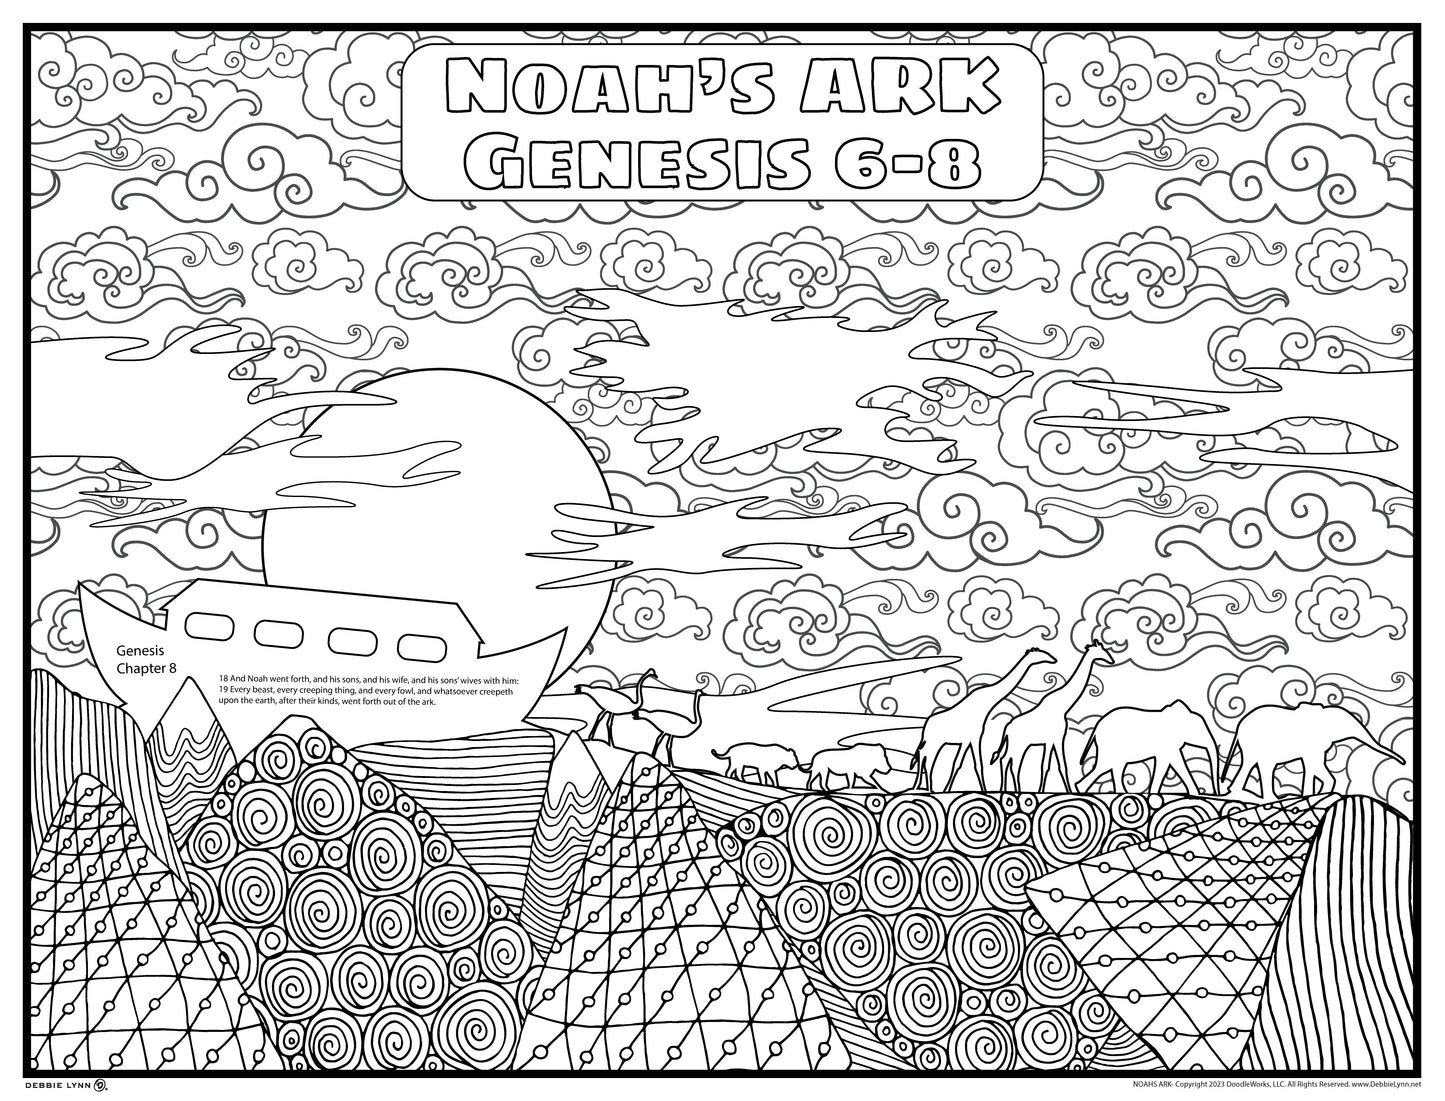 NOAH'S ARK FAITH PERSONALIZED GIANT COLORING POSTER 46"x60"